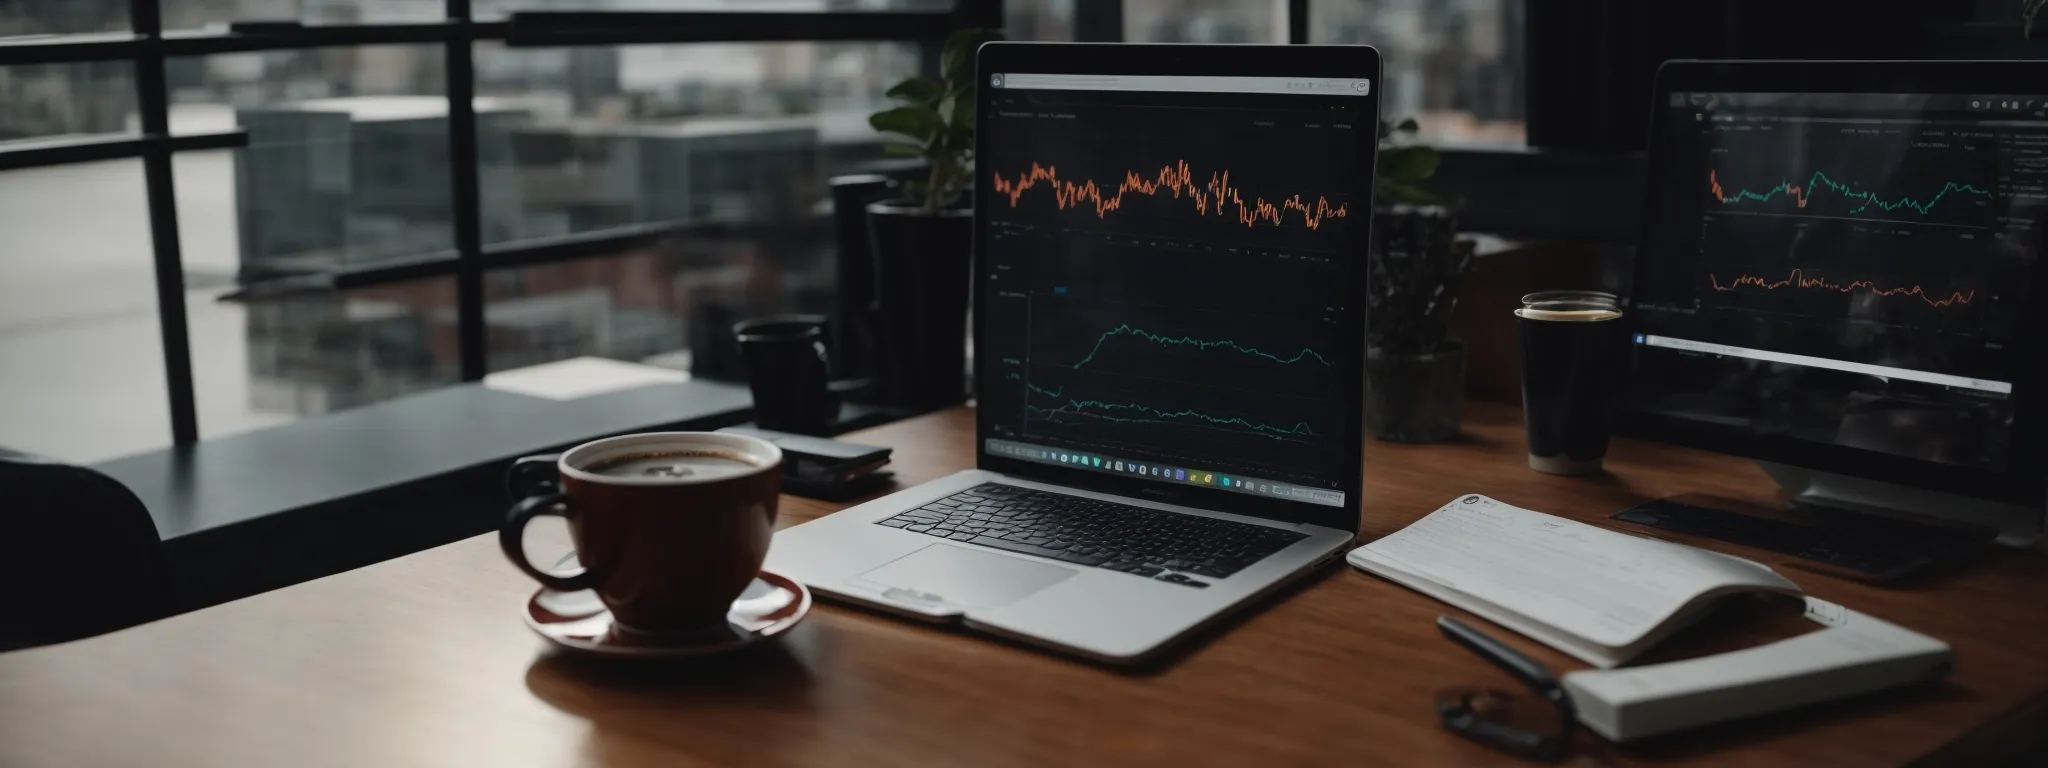 a laptop with graphs and charts on the screen, positioned on a desk alongside a coffee cup and a notepad.